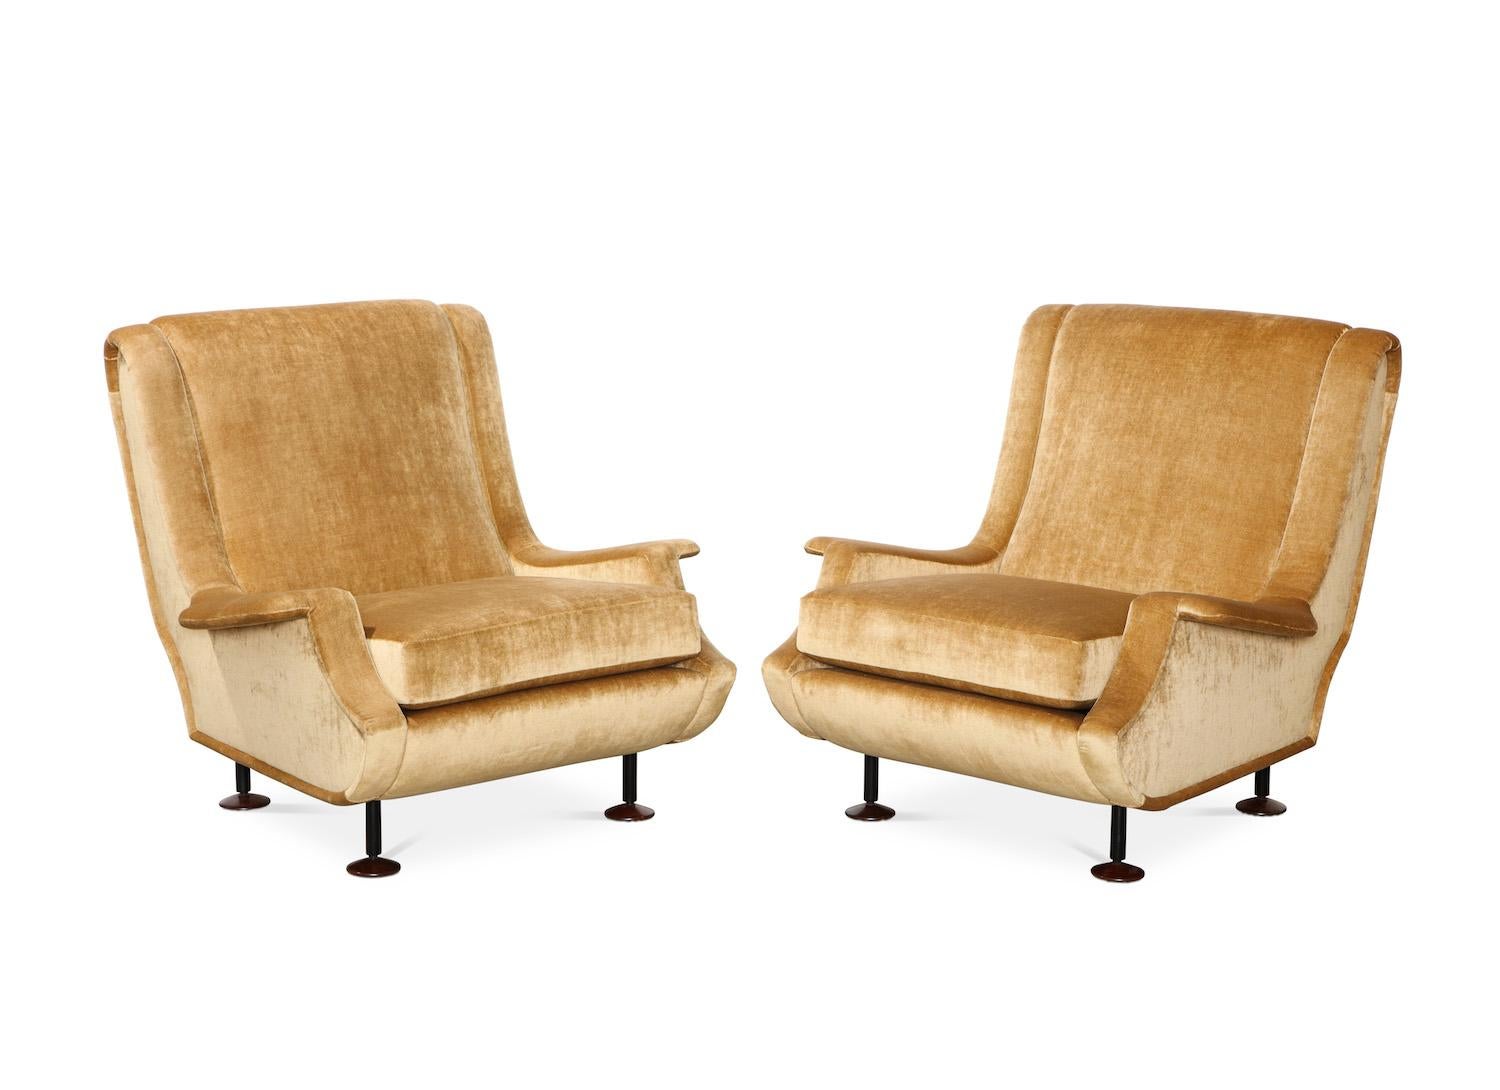 Marco Zanuso rare pair of “Regent” lounge chairs. Elegant, sculptural lounge chair of unusual form. Black metal legs, wood feet and pale-gold velvet upholstery.